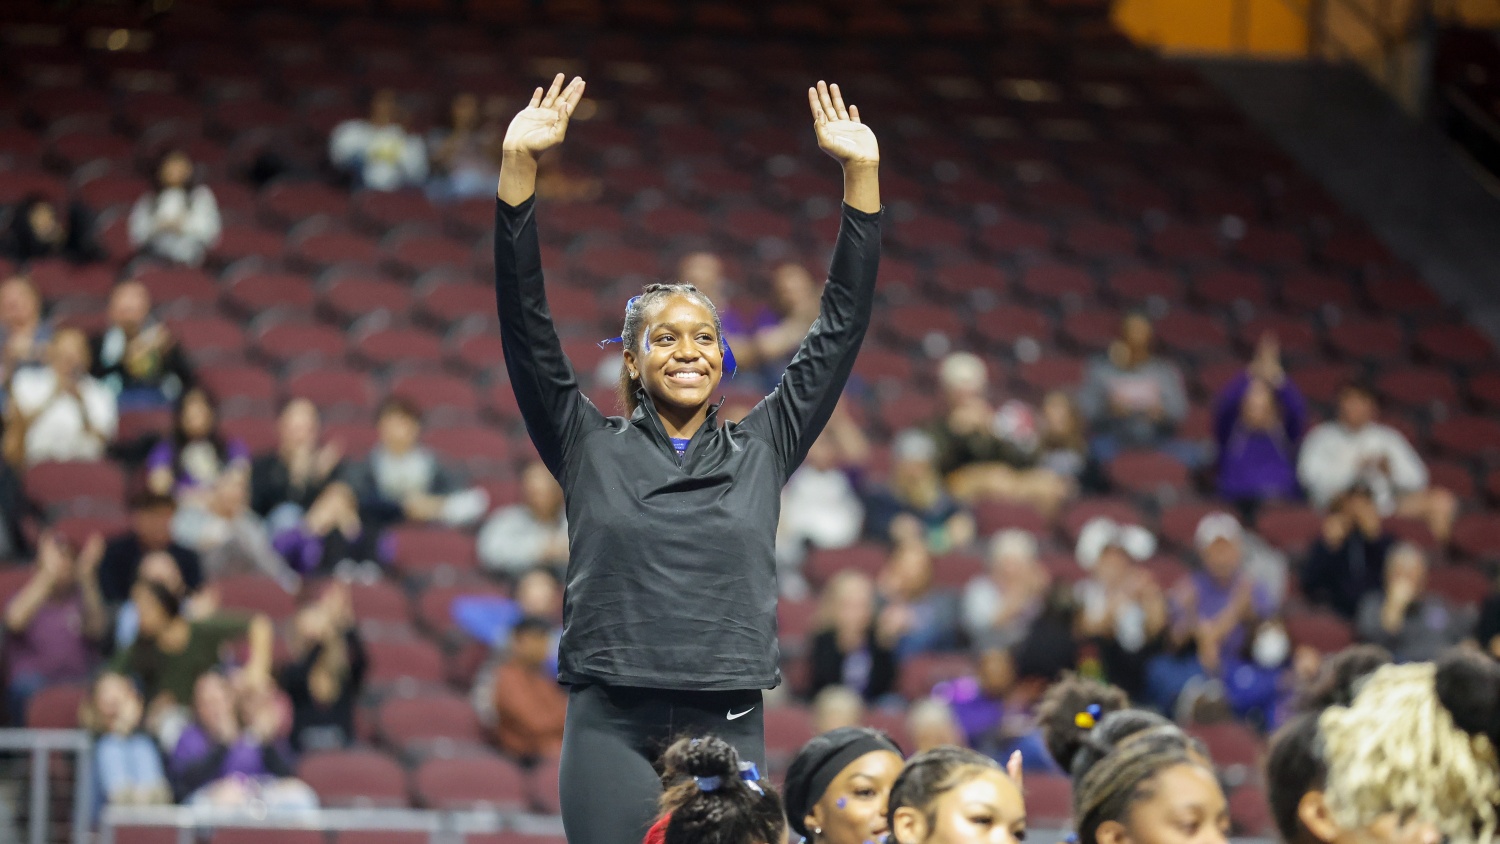 Fisk Gymnast Morgan Price Becomes First HBCU Student To Win Collegiate Title